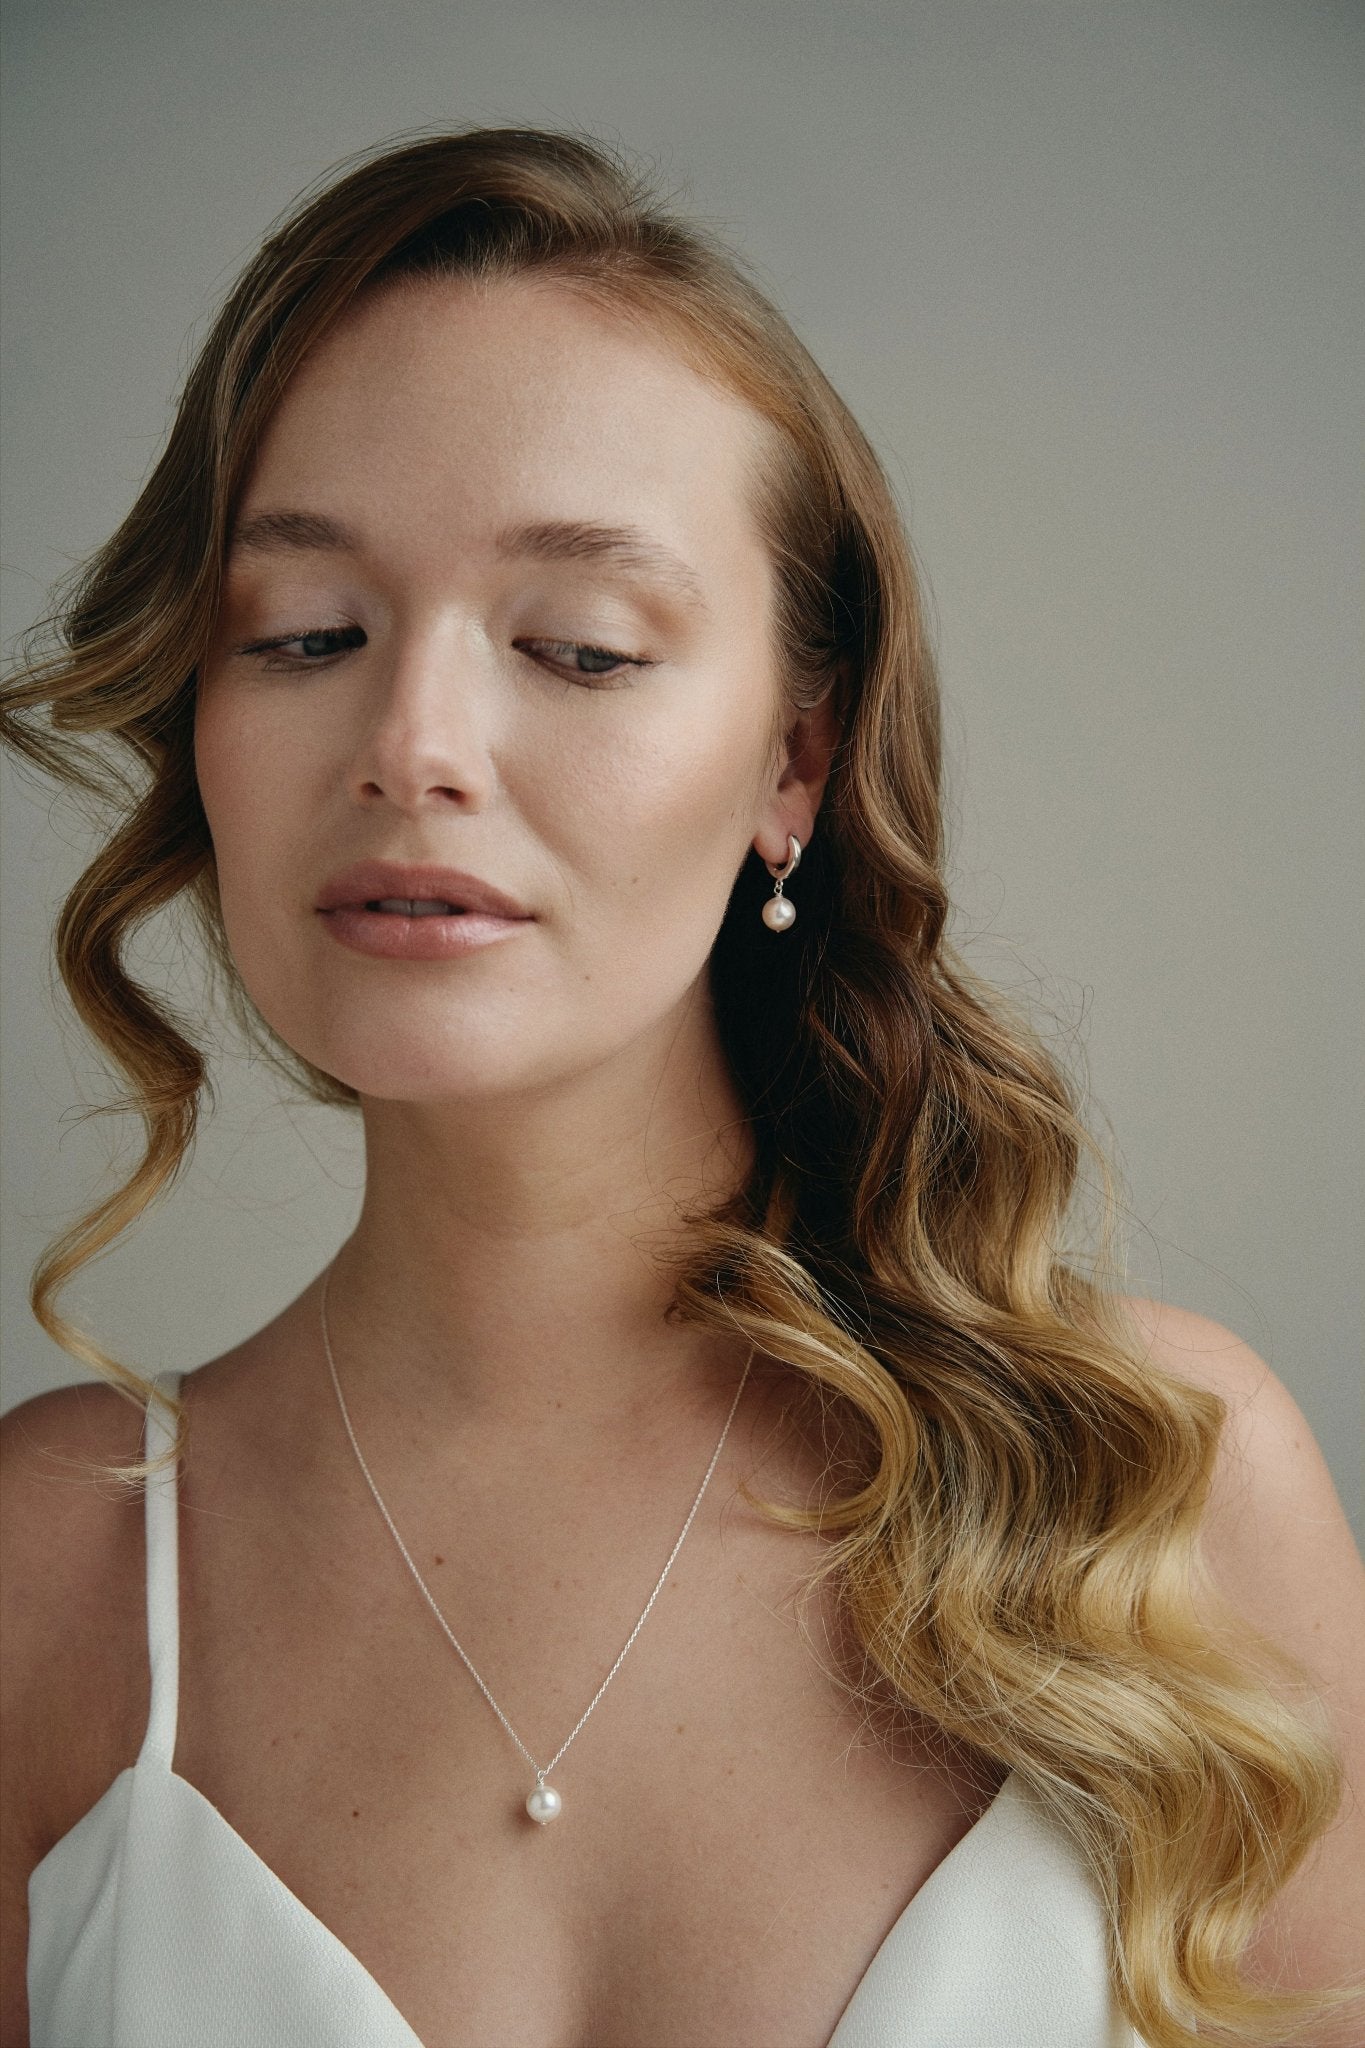 model wears round pearl earrings and matching necklace